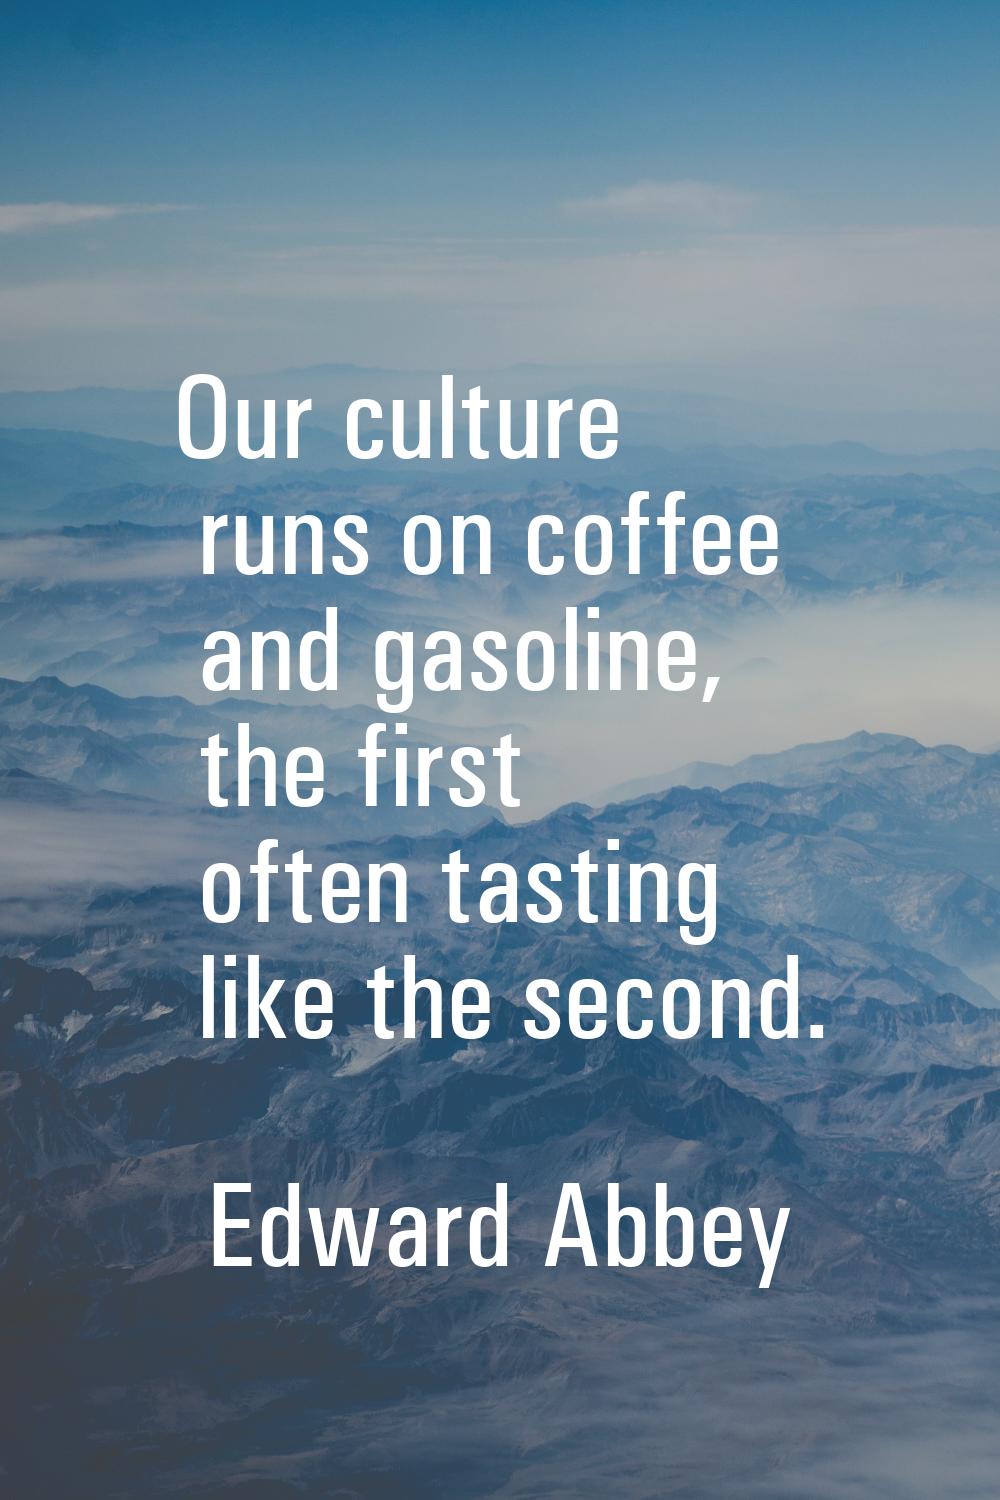 Our culture runs on coffee and gasoline, the first often tasting like the second.